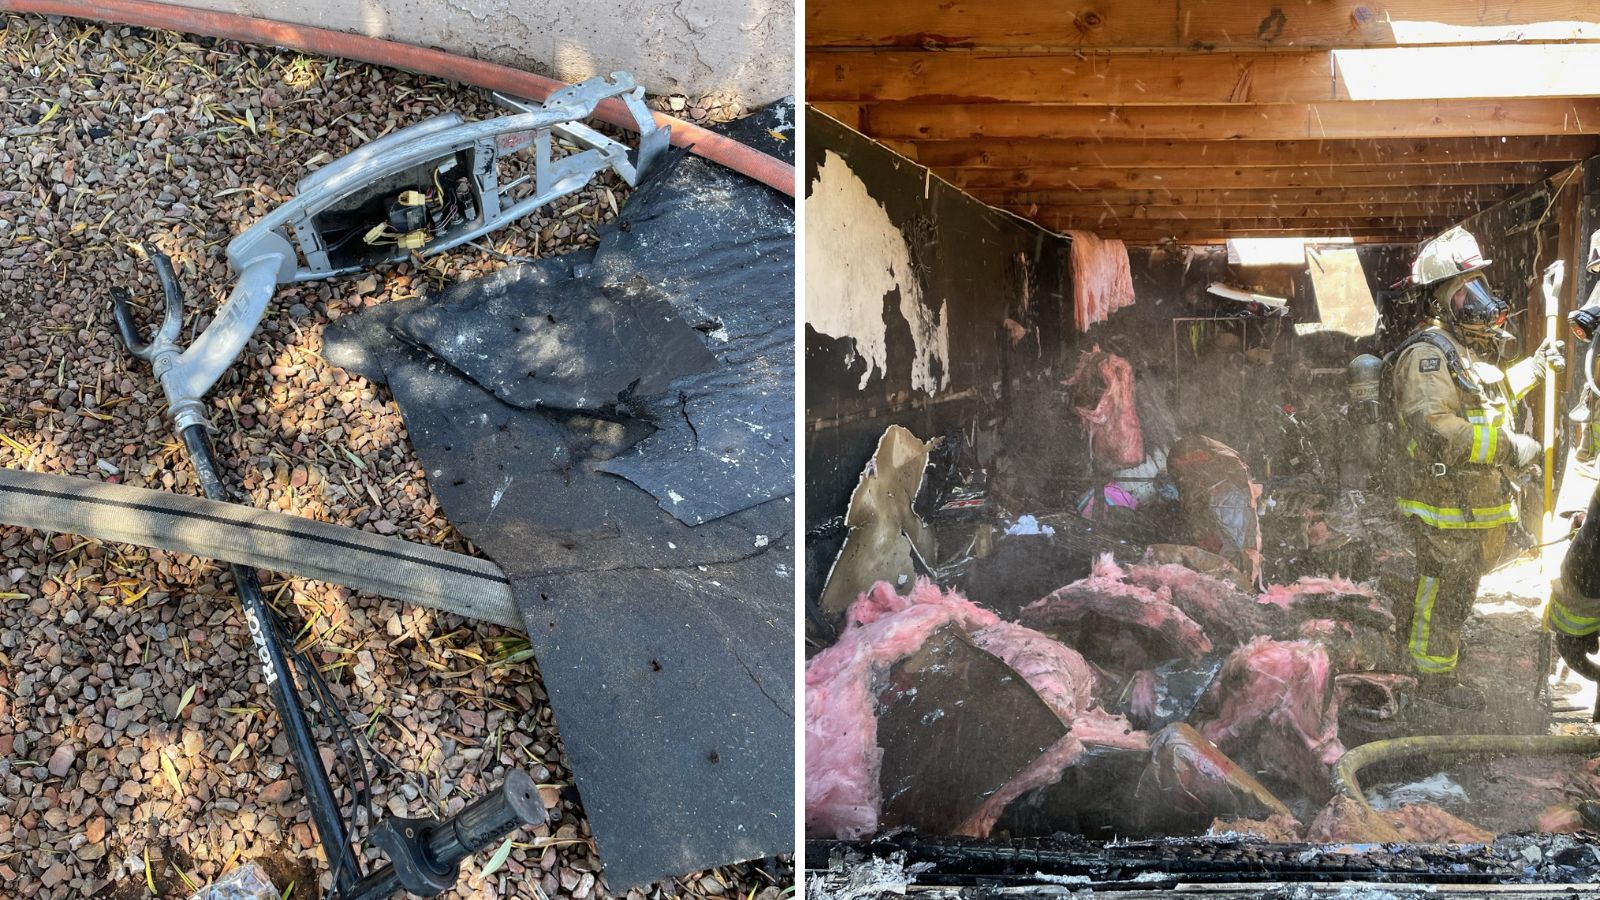 Apartment fire in Mesa caused by electric scooter, authorities say